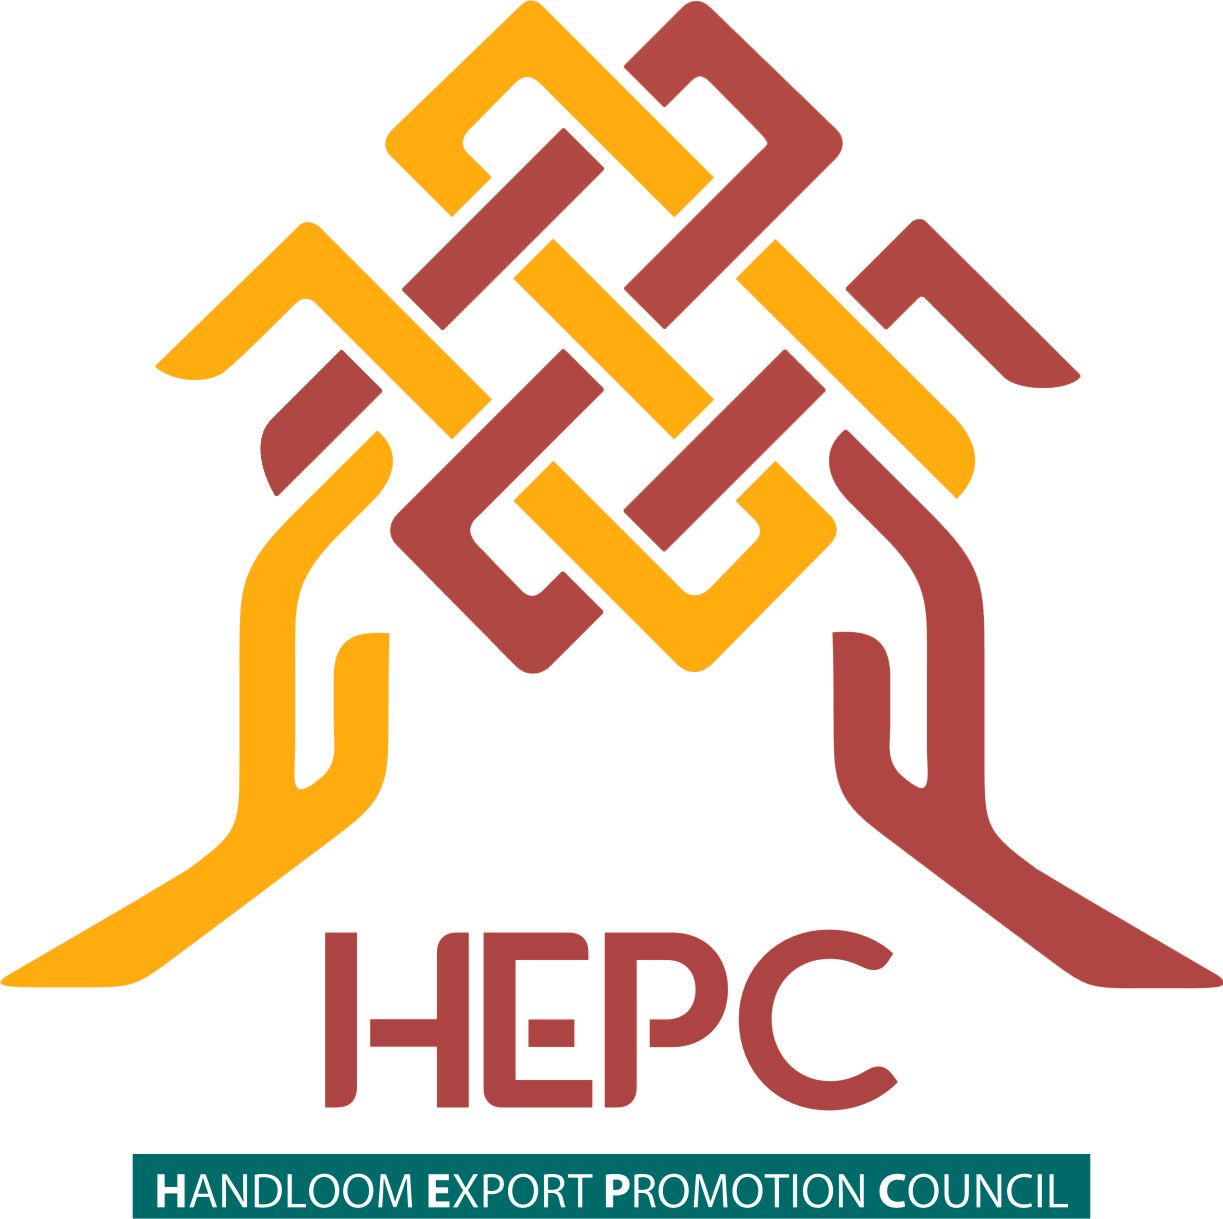 The Handloom Export Promotion Council